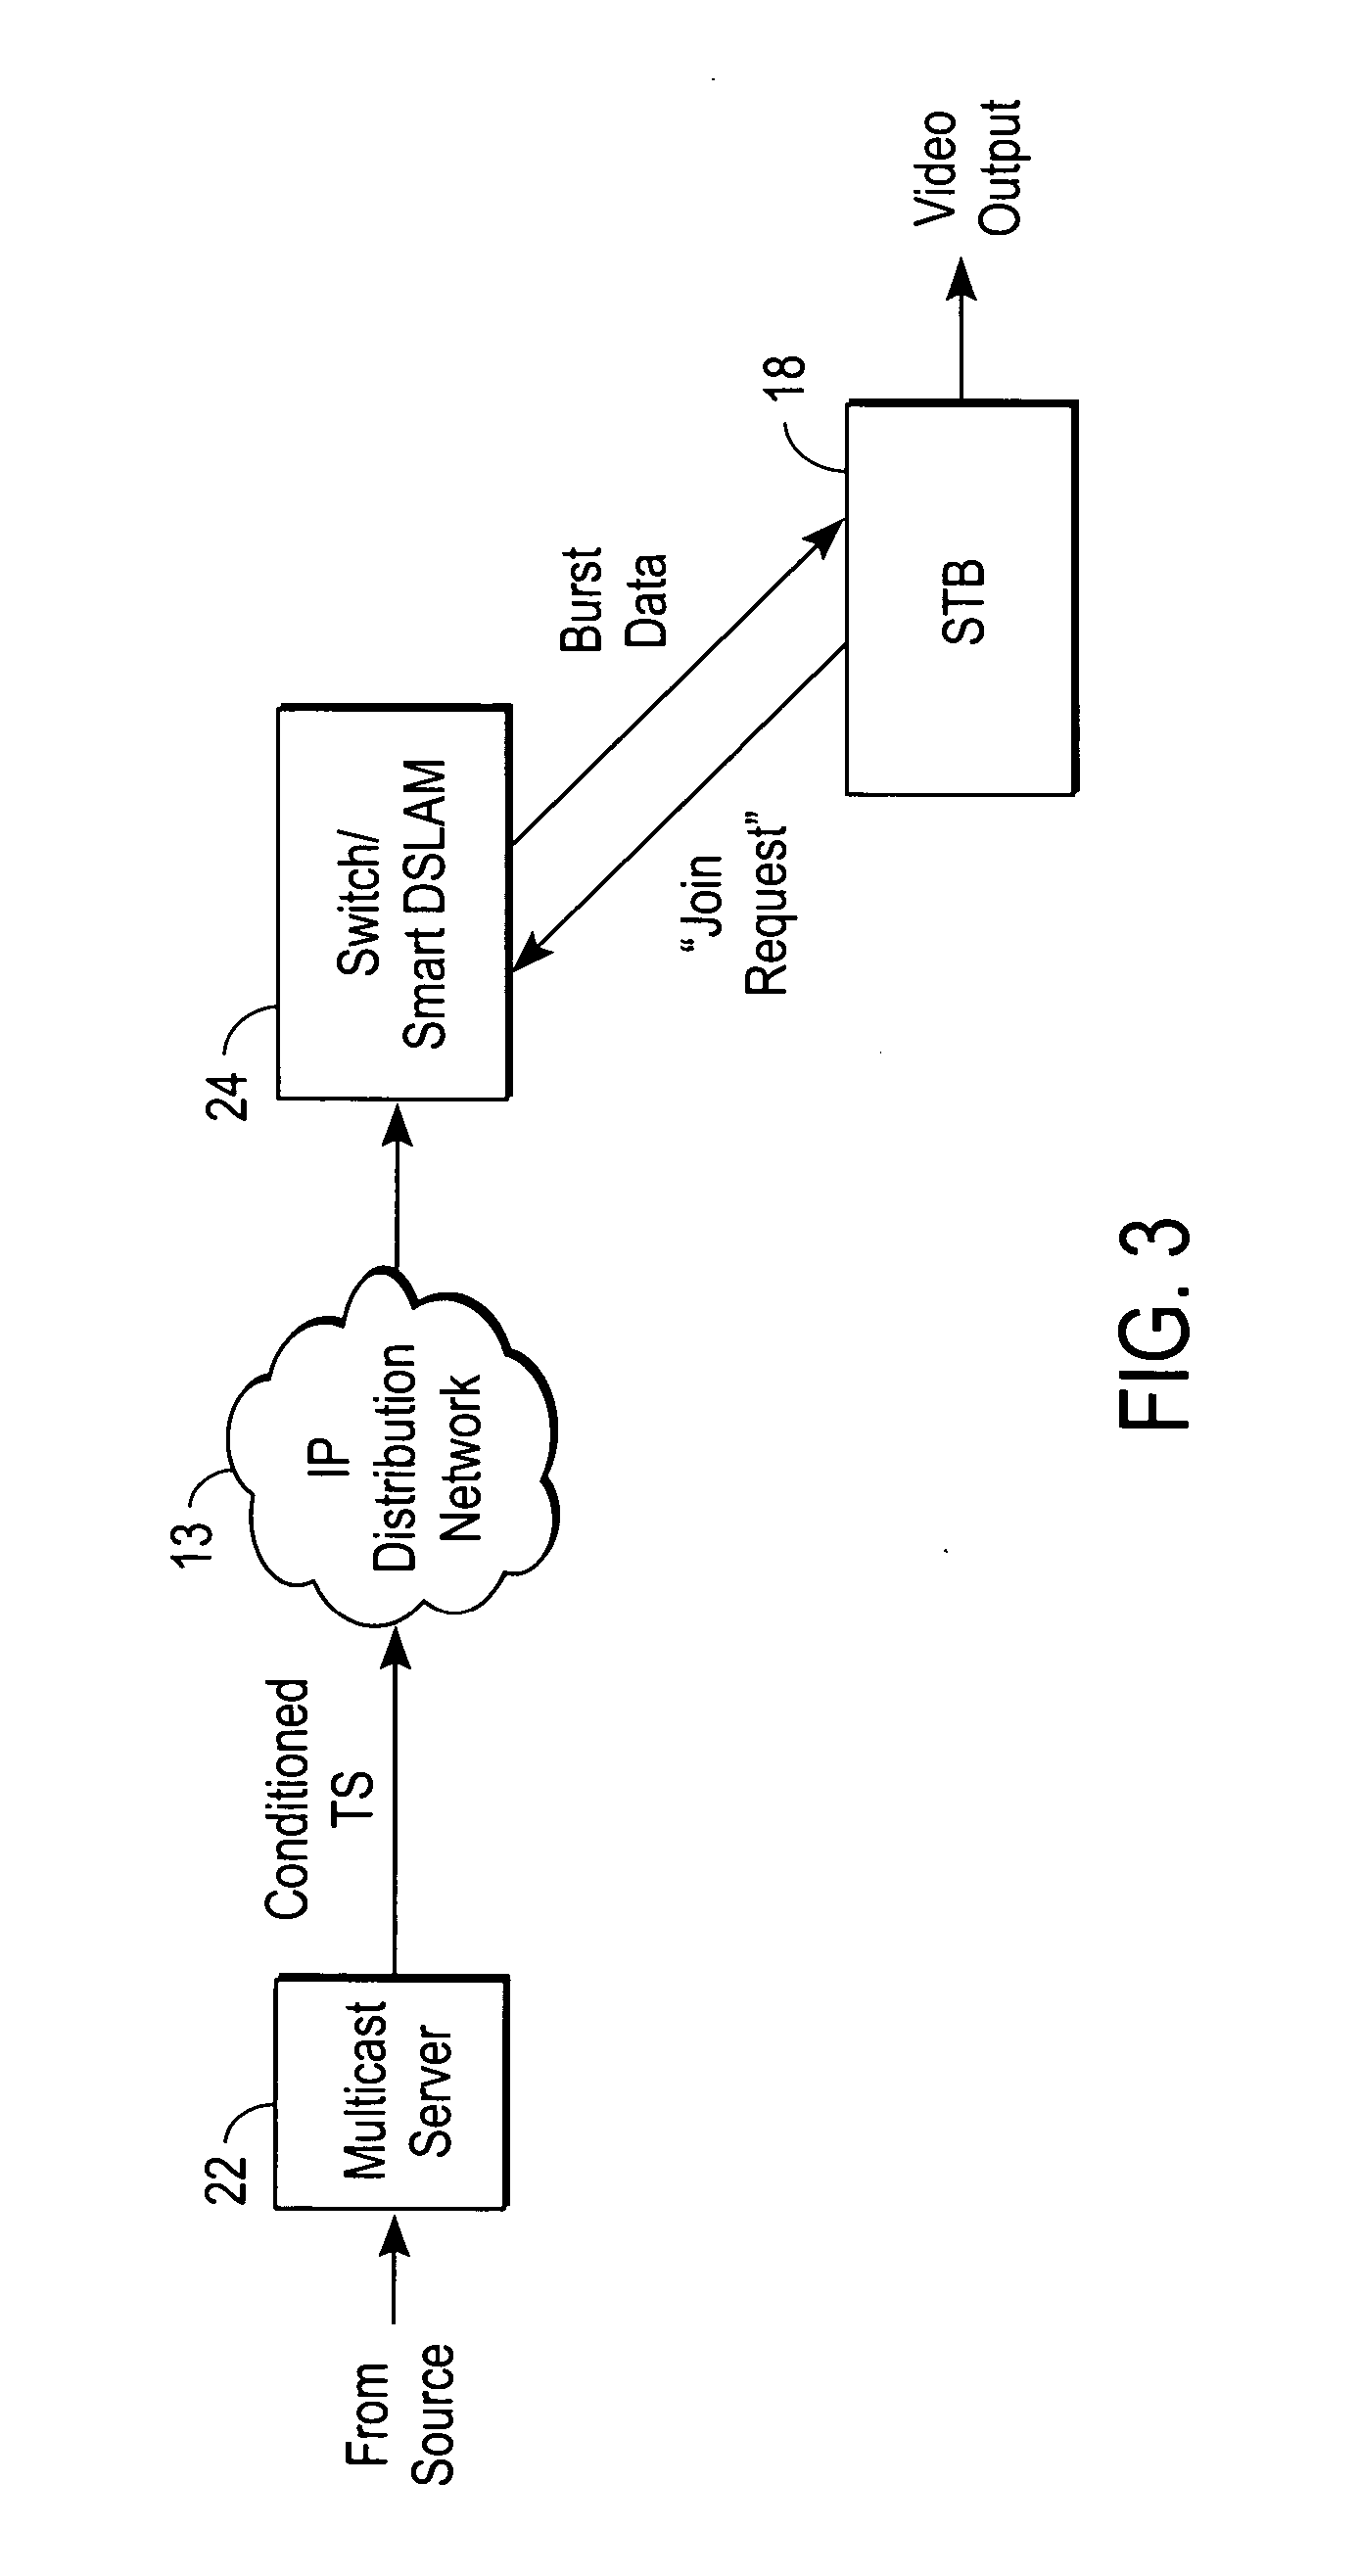 System and method for fast start-up of live multicast streams transmitted over a packet network